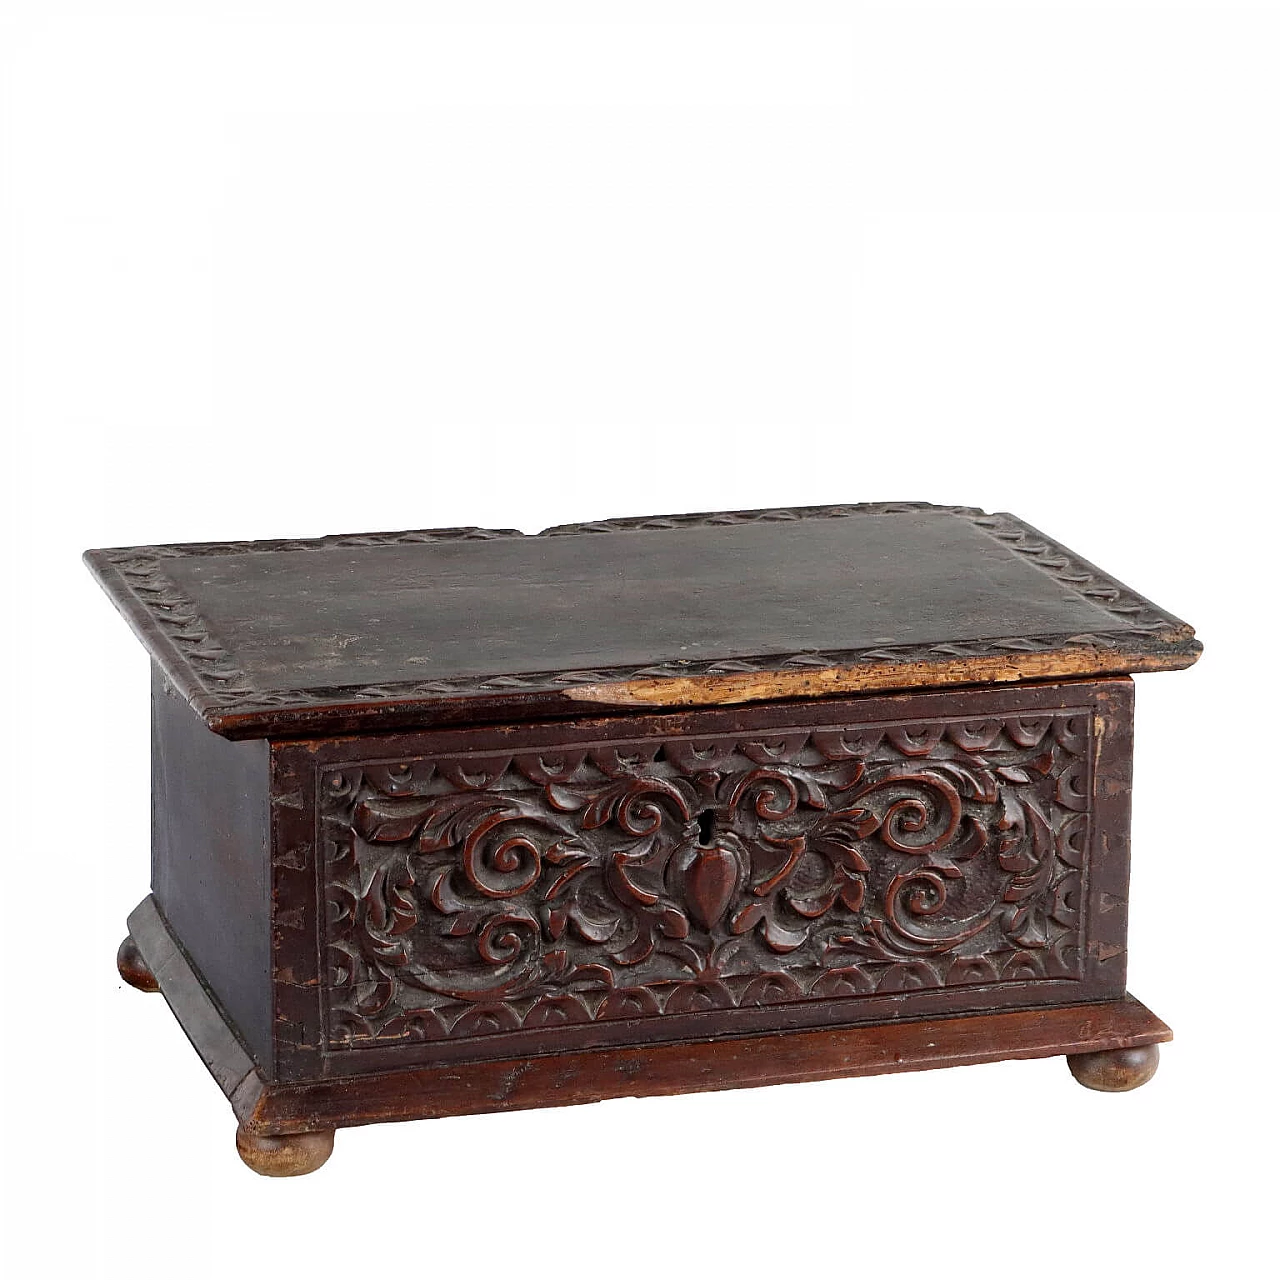 Late Renaissance walnut box with carved front, early 17th century 1